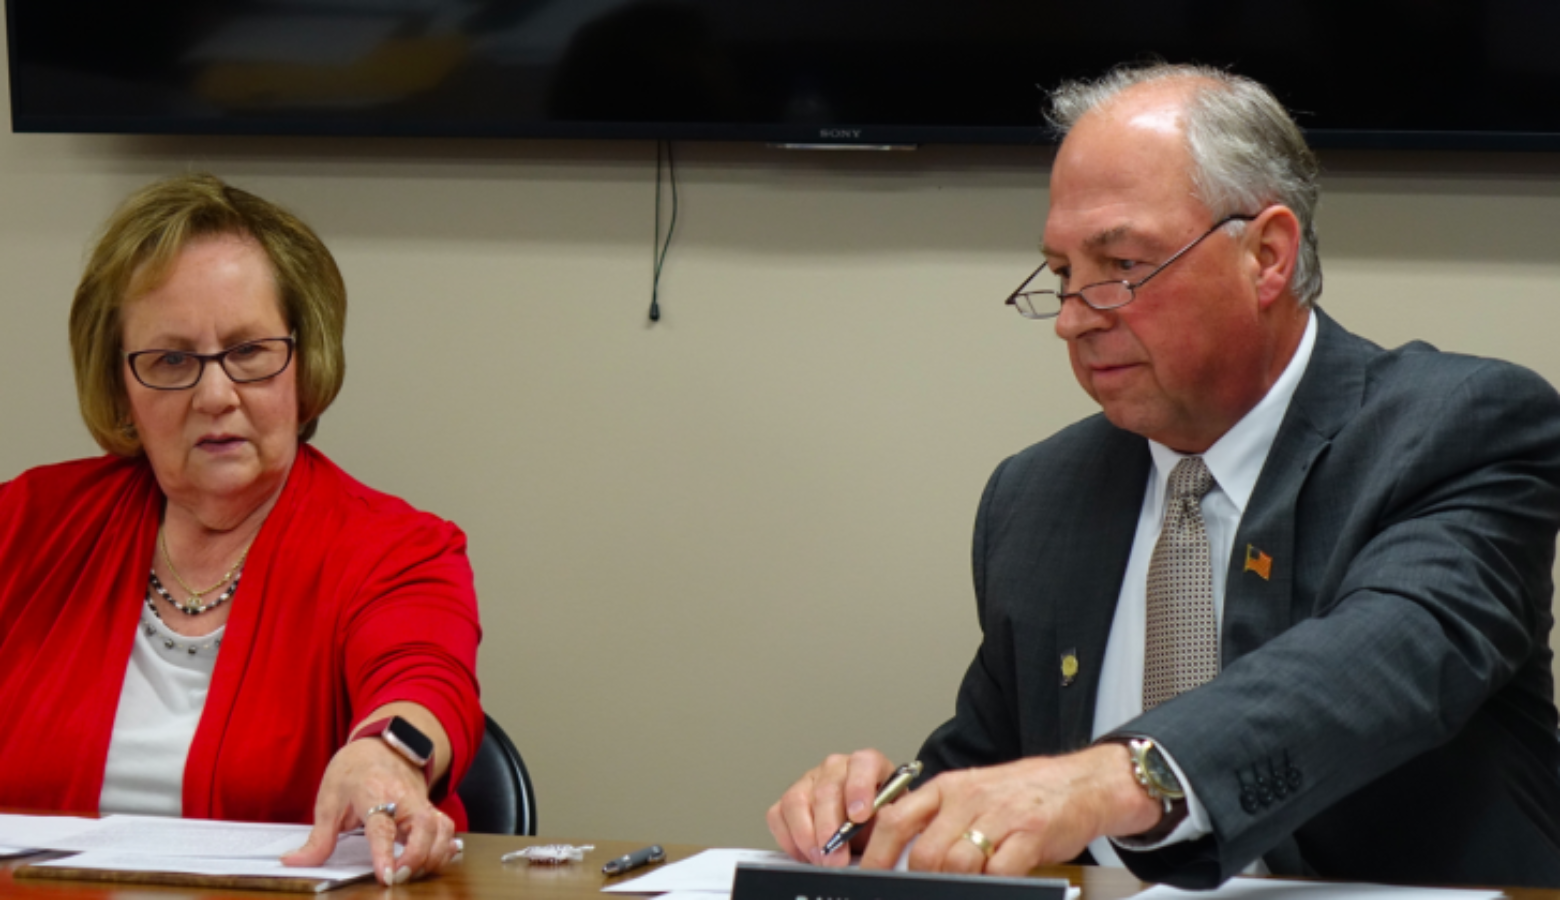 Daleville Community School's Board President Diane Evans, left, and Superintendent Paul Garrison look at documents before the school board votes to close Indiana Virtual School and Indiana Virtual Pathways Academy during a board meeting Monday, Aug. 26, 2019 at the district office.